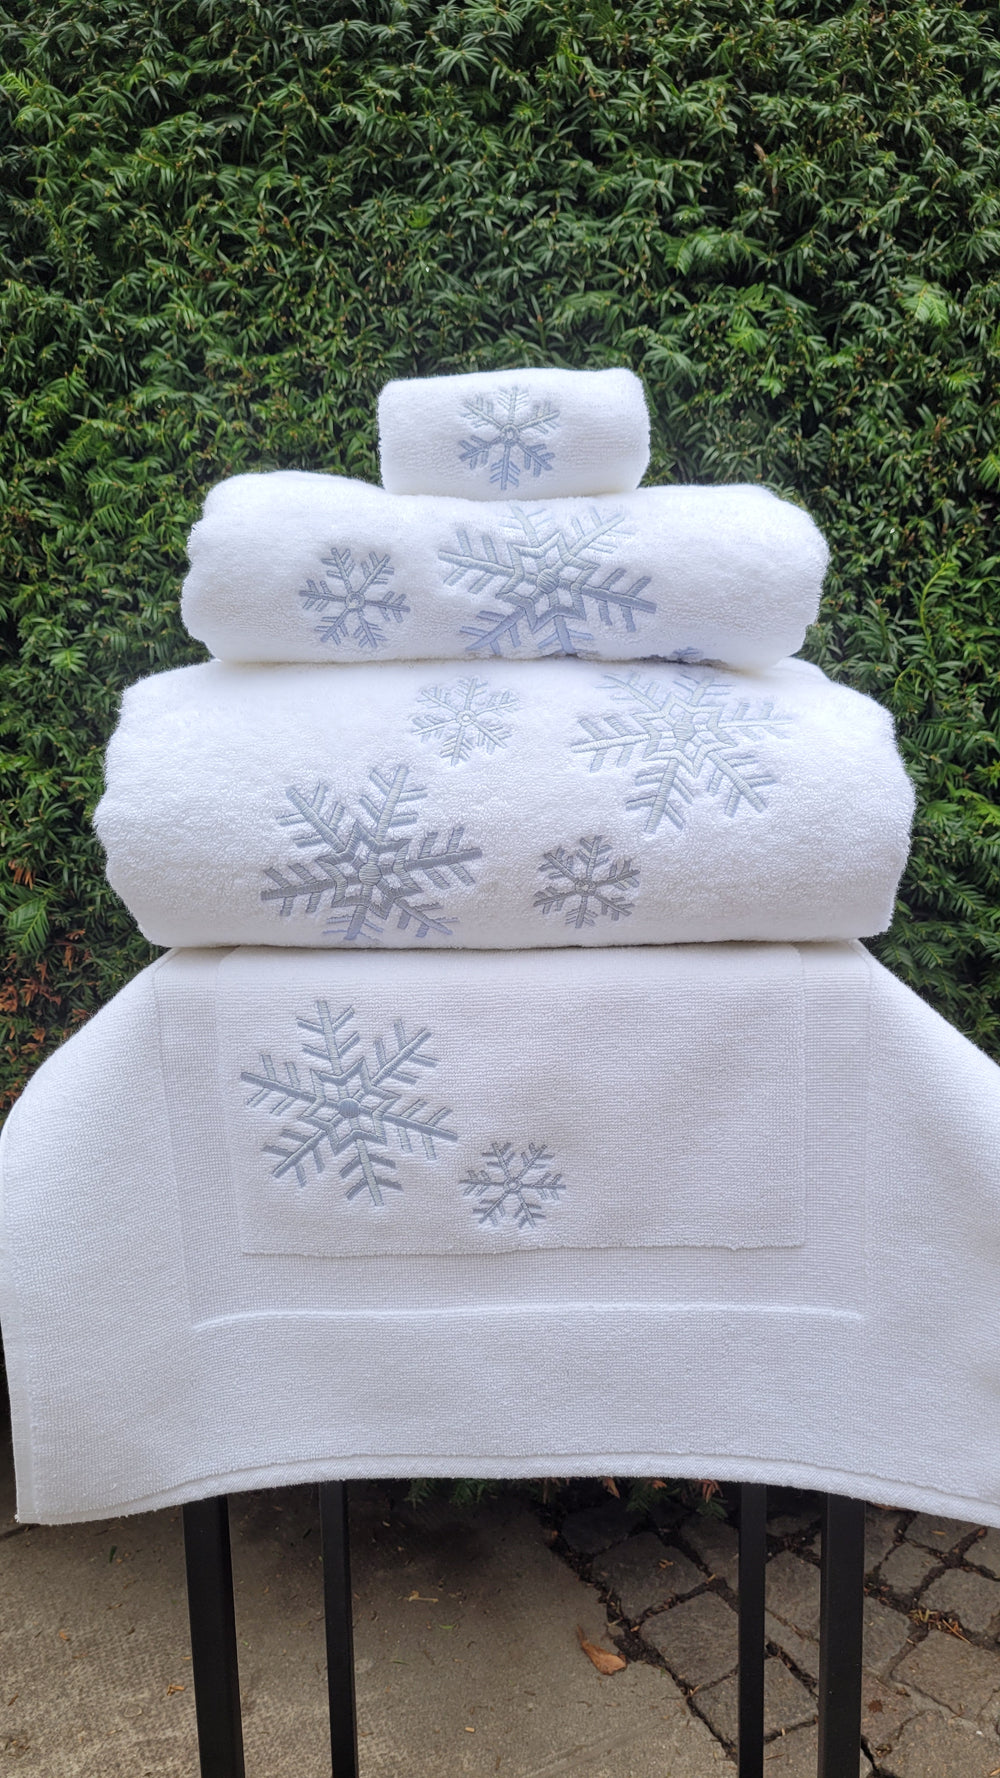 White bath towels with a heart embroidered with Snowflakes